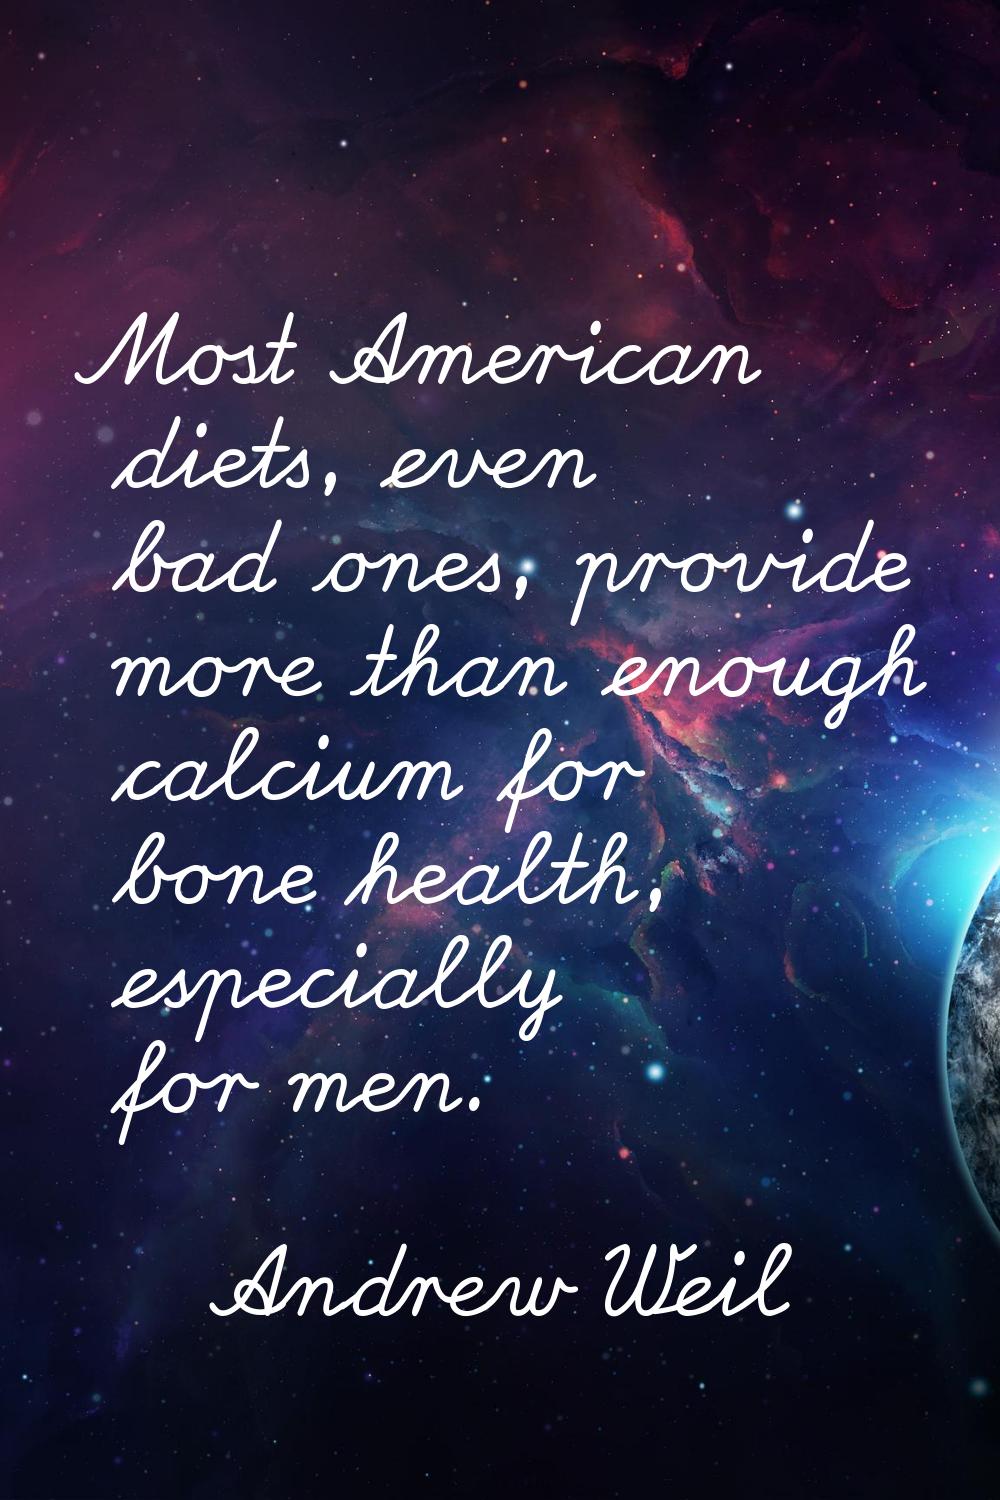 Most American diets, even bad ones, provide more than enough calcium for bone health, especially fo